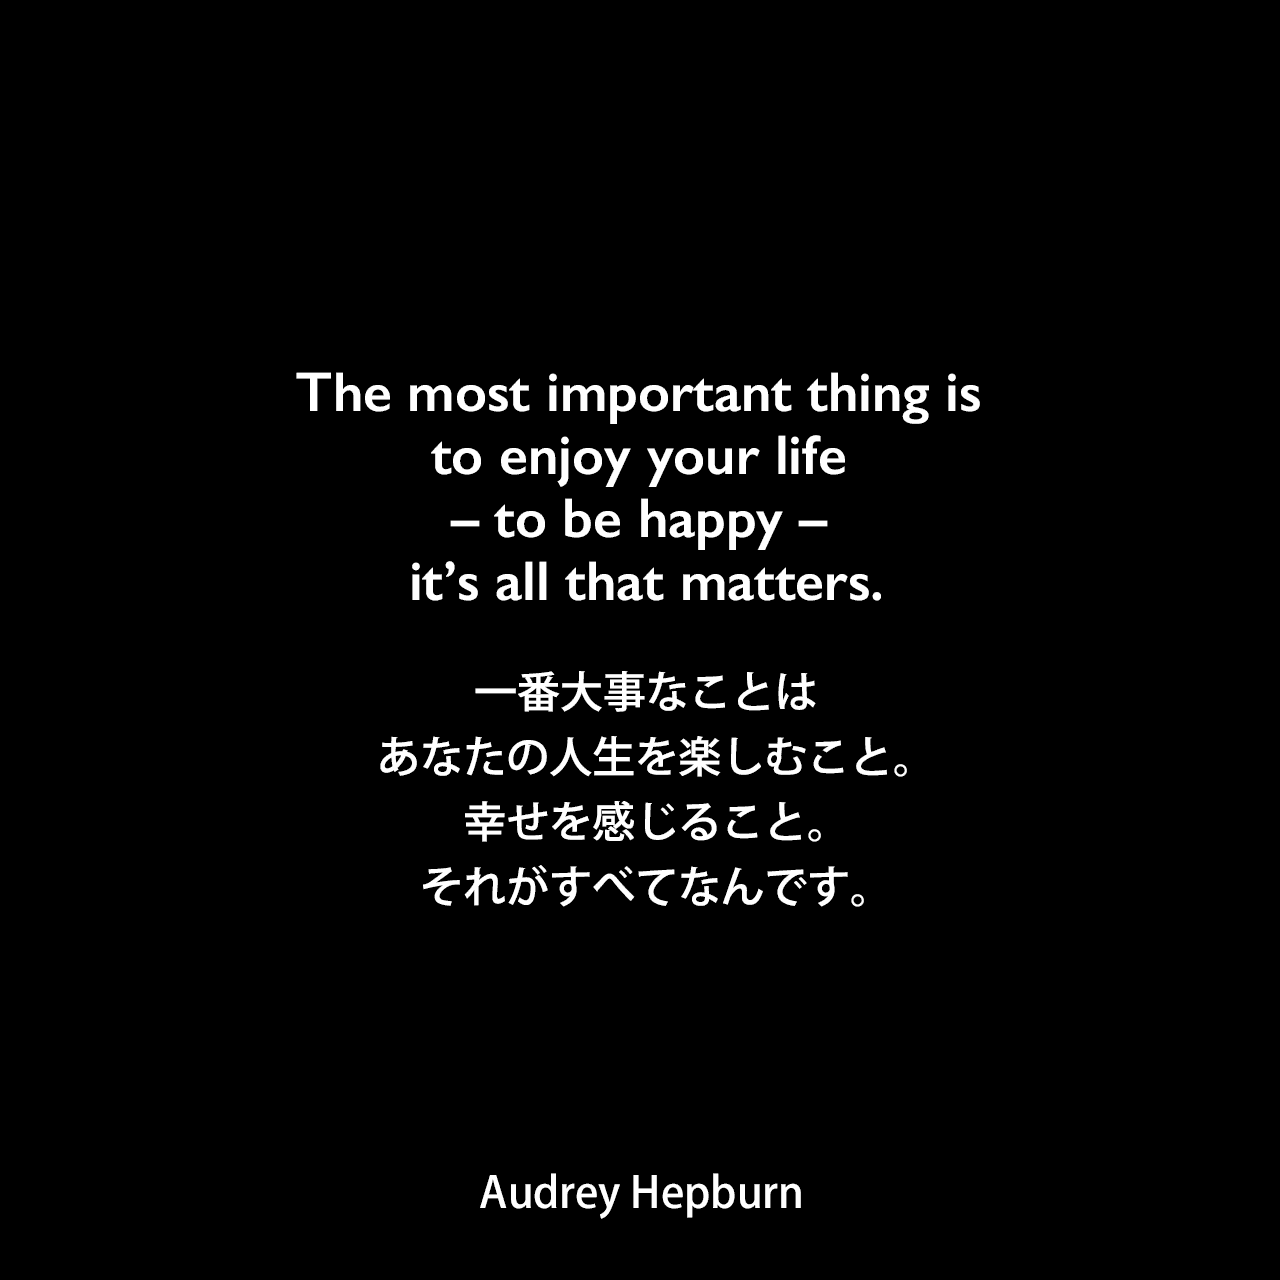 The most important thing is to enjoy your life – to be happy – it’s all that matters.一番大事なことは、あなたの人生を楽しむこと。幸せを感じること。それがすべてなんです。Audrey Hepburn